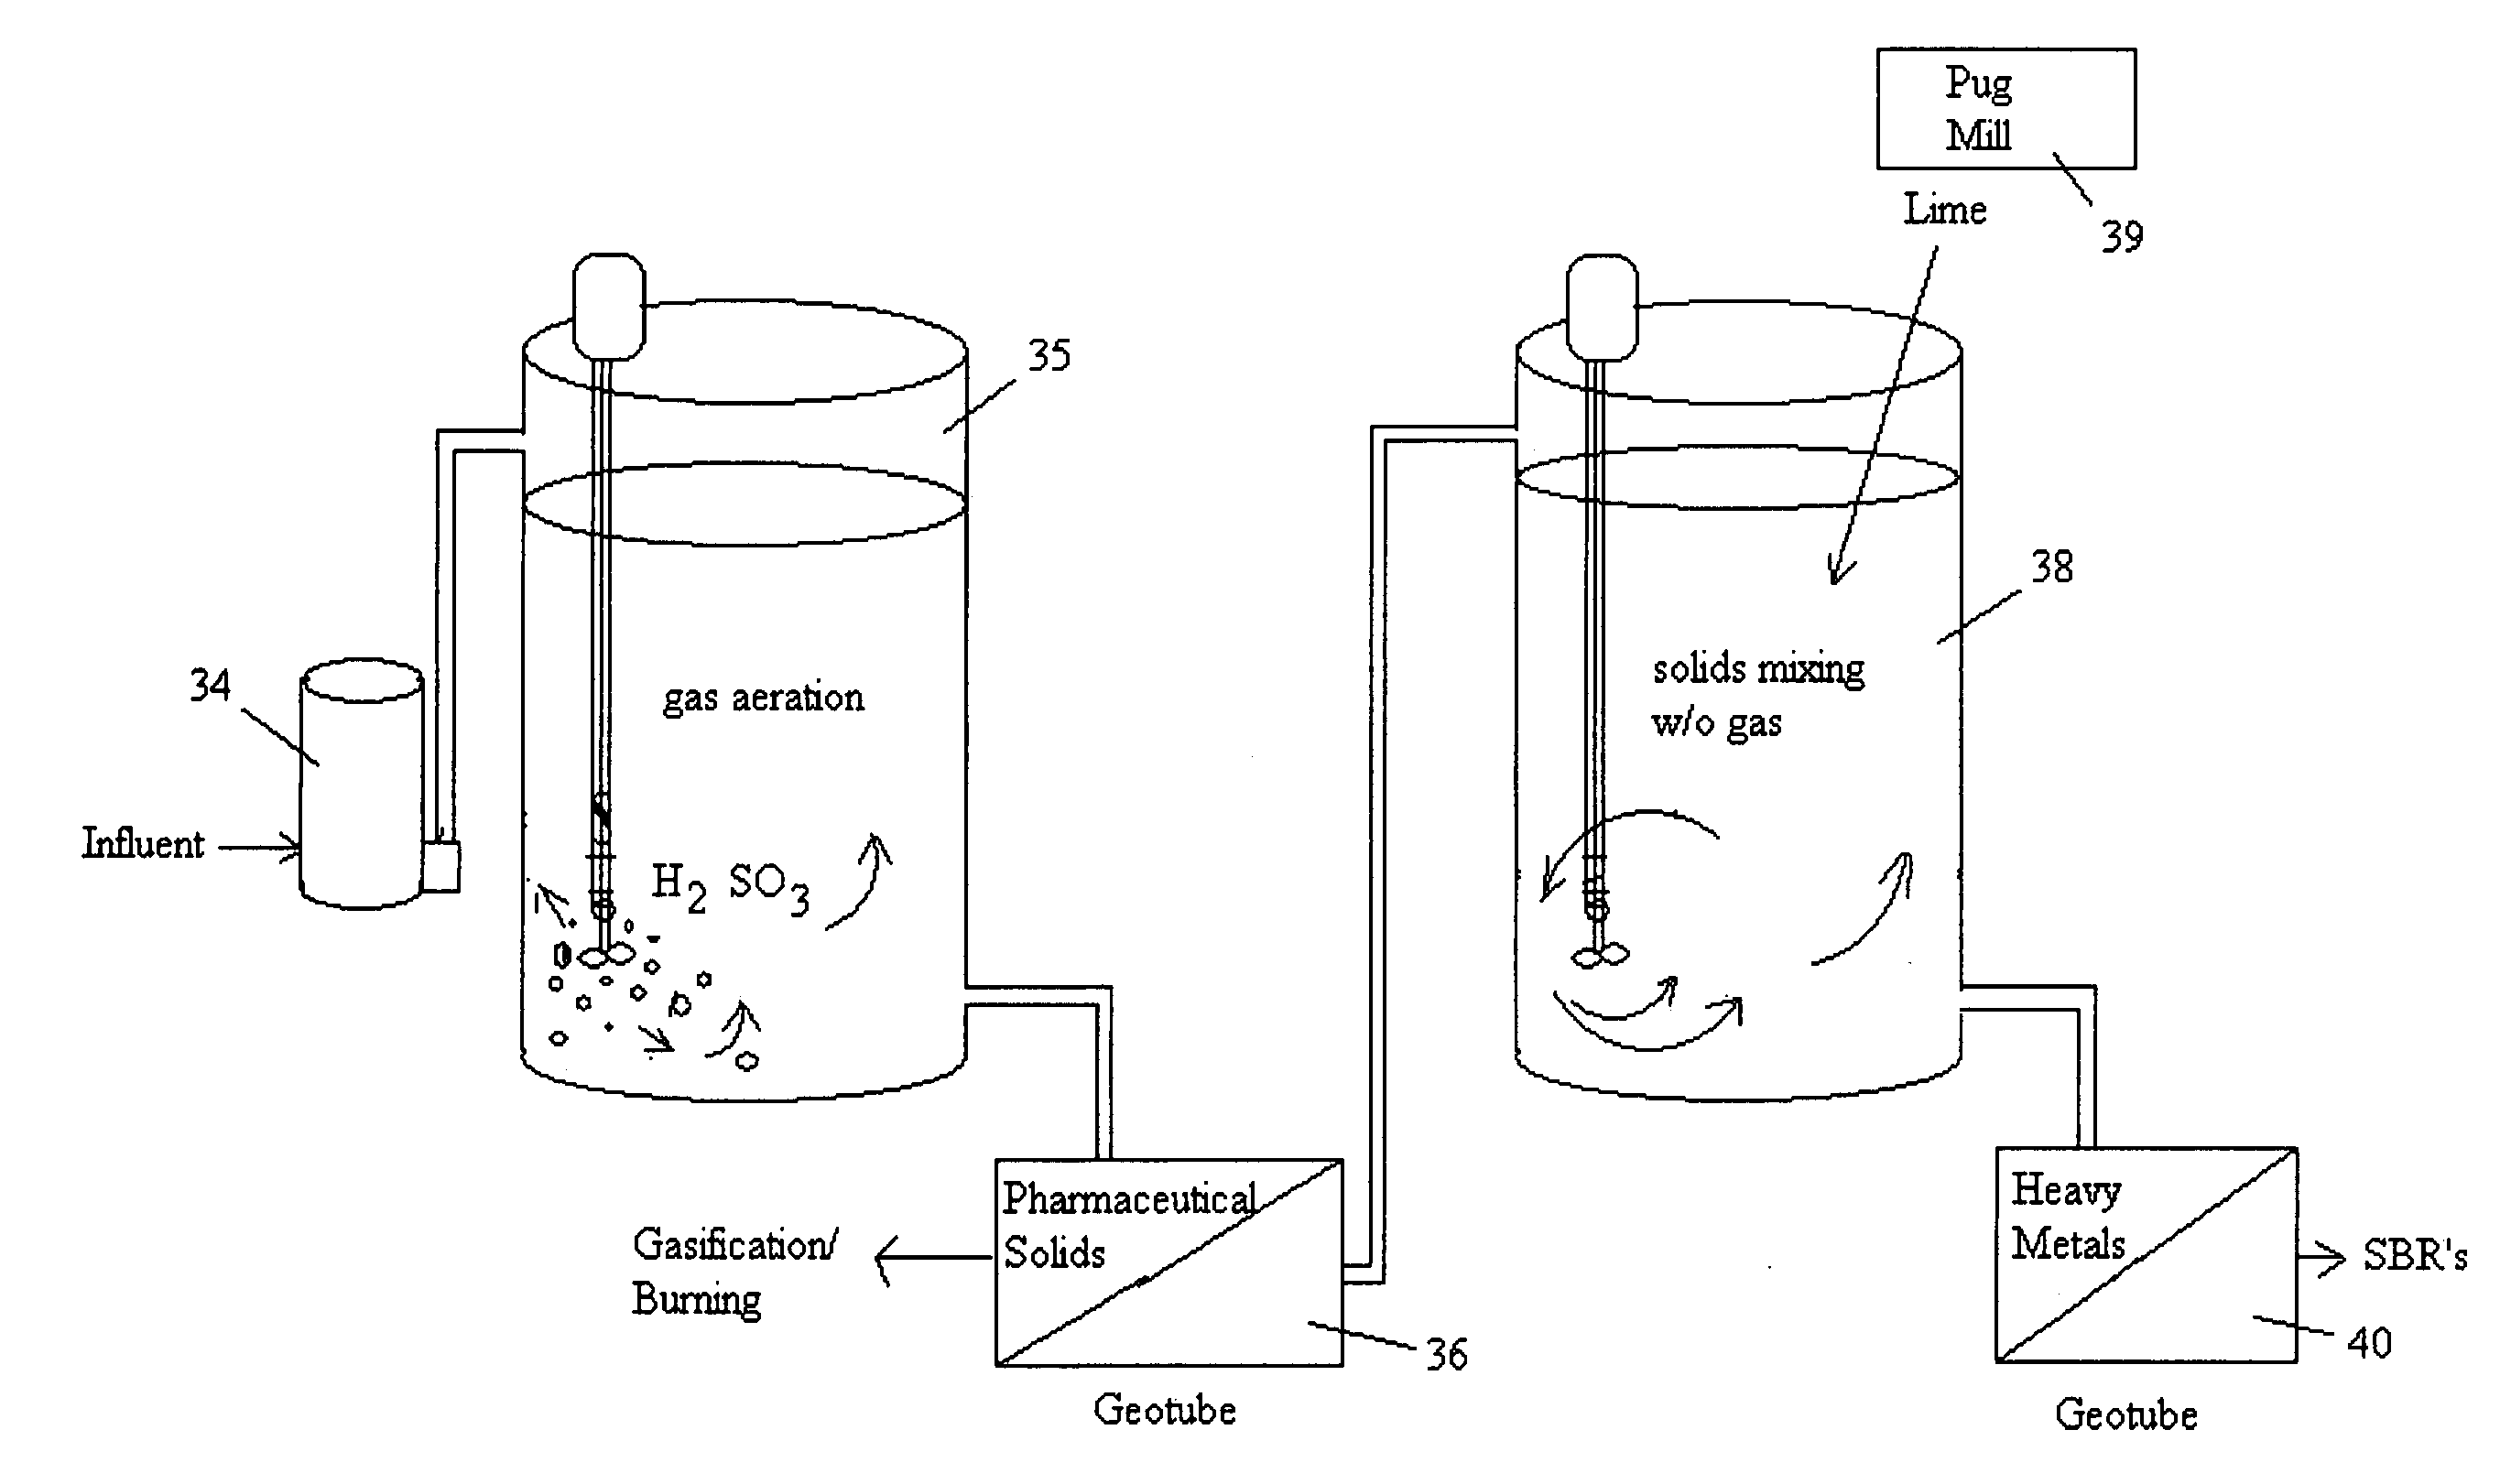 Treatment method reducing wastewater influent chemical/pharmaceuticals before biological reduction to enhance sewage treatment